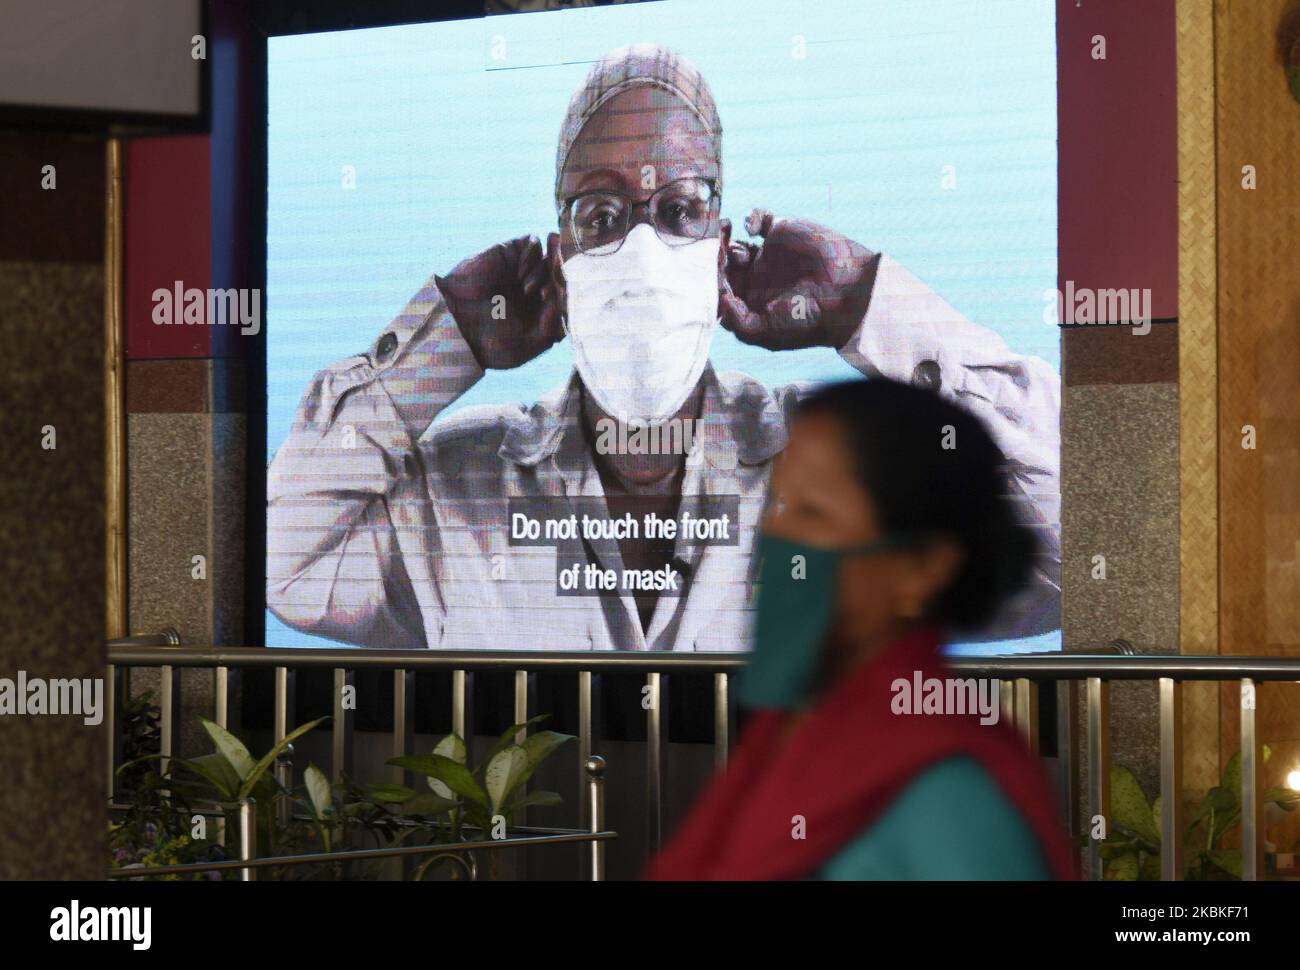 In a large display, a video showing how to use mask, as a railway worker walking wearing protective mask avid corona virus scare, at Guwahati Railway Station, in Guwahati, Assam, India on 24 March 2020. (Photo by David Talukdar/NurPhoto) Stock Photo